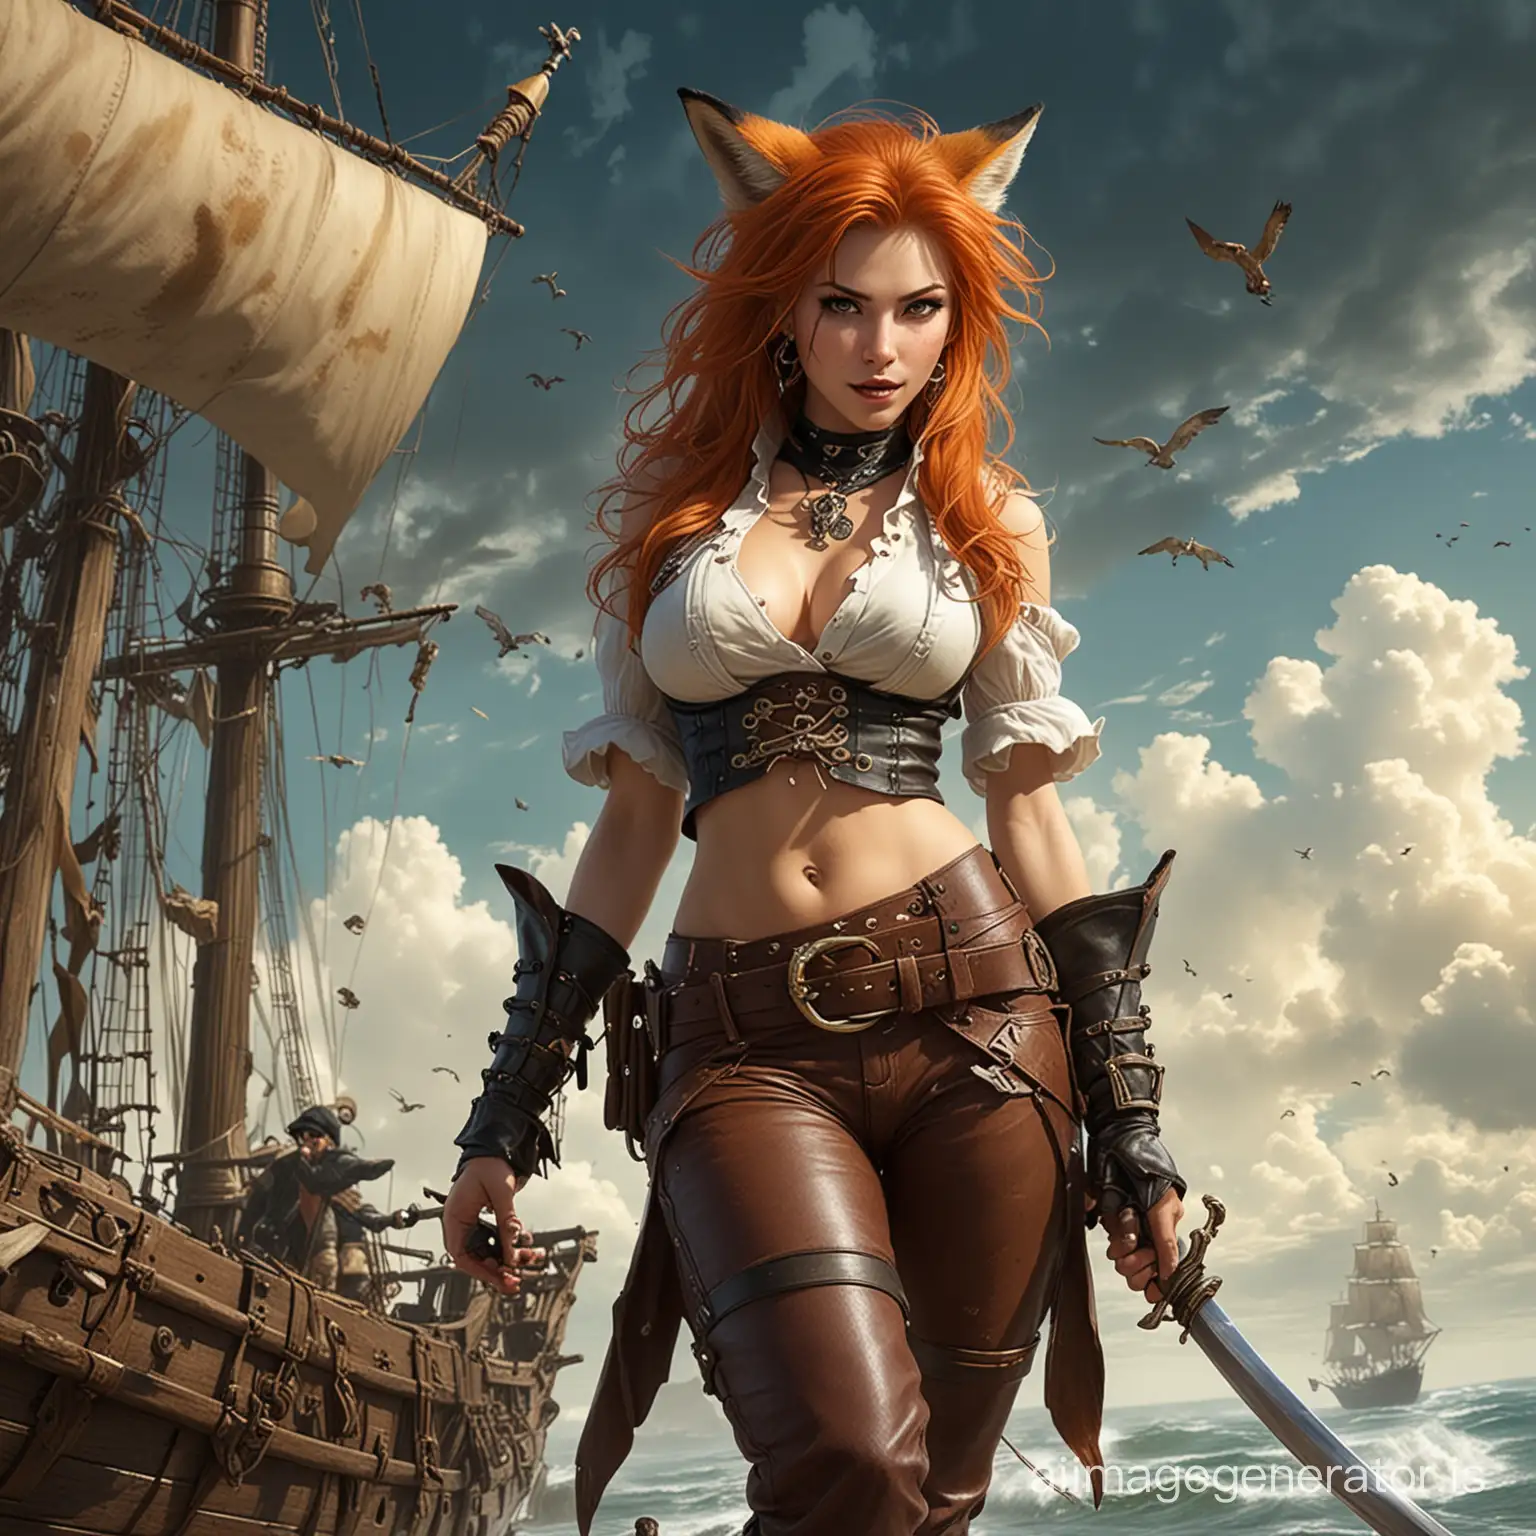 The style of Luis Royo and Todd Lockwood and Yoshitaki Amano: the (((Fox)))-pirate-girl is a little crazy, artstation, anthropomorphism, fox tail, human pose, pirate clothes, bright neckerchief, trousers, vest, leather belts, dagger on the belt in a sheath, (((hilarious madness))), hands on hips, bright and positive image in marine scenery with a pirate ship, ocean, seagulls, clear sky with clouds, epic, (((pathetic dynamic pose))), laughter, hyperdetalization, hyperbolization, sharp and clear image, juicy